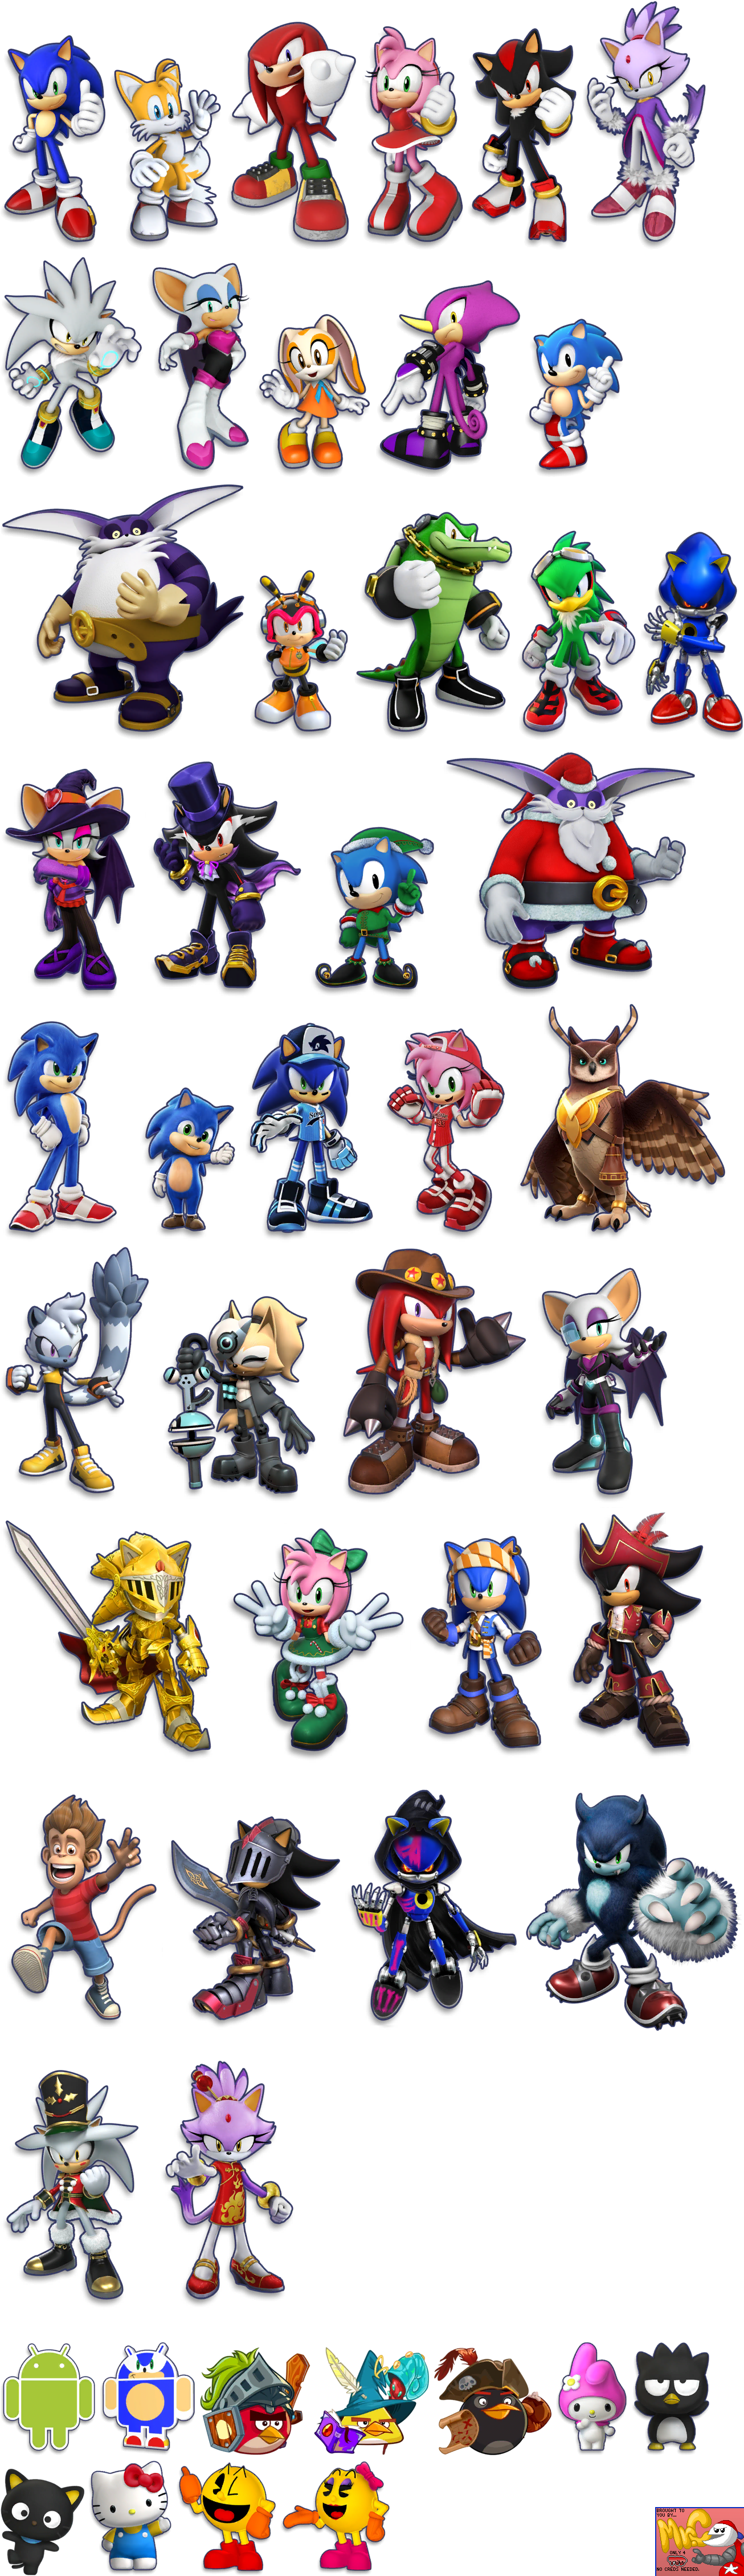 sonic dash all characters mod